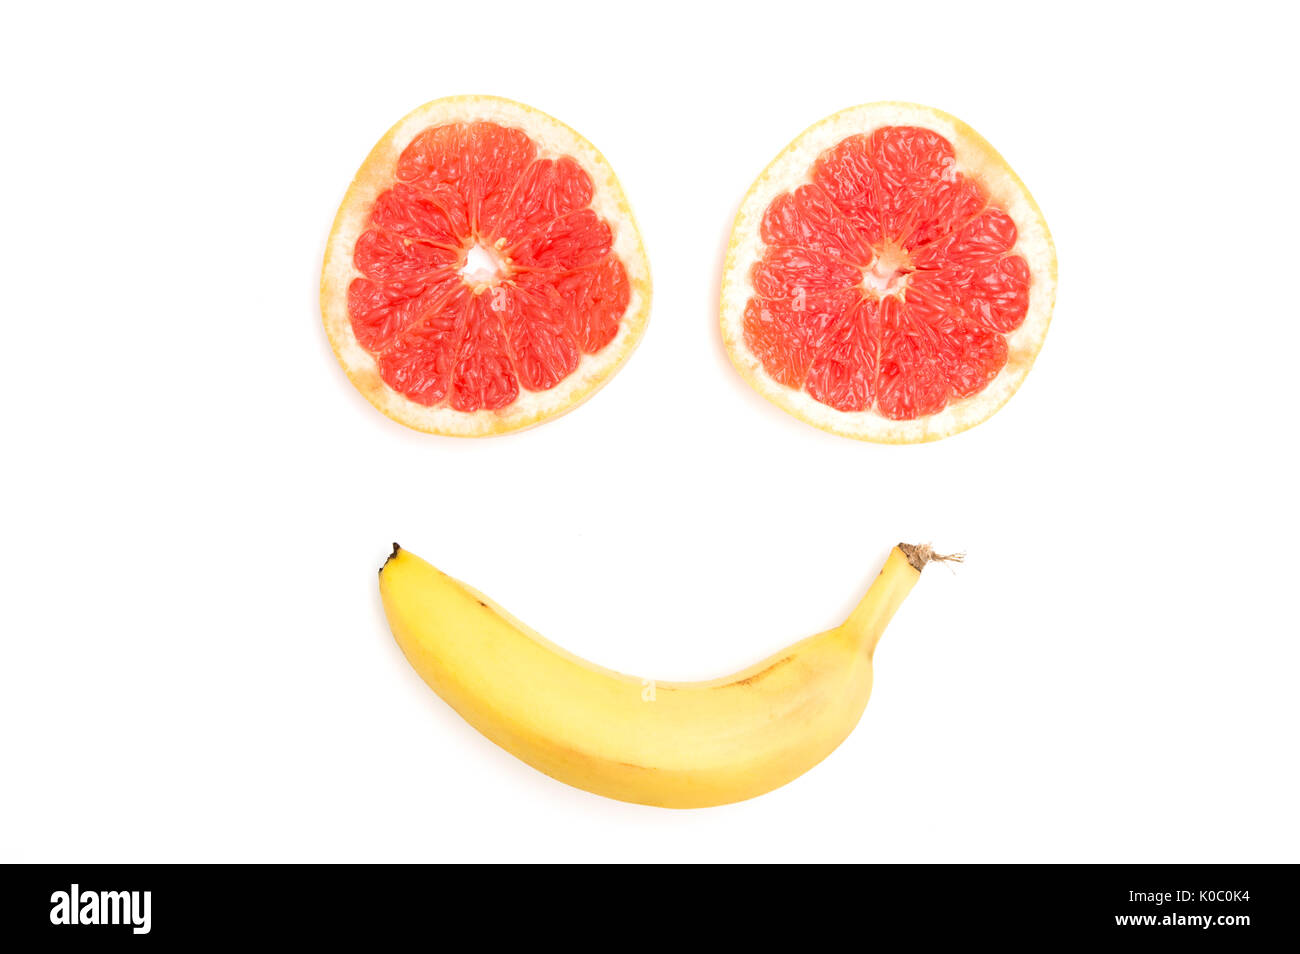 Smiling face made from grapefruit and banana on white background Stock Photo